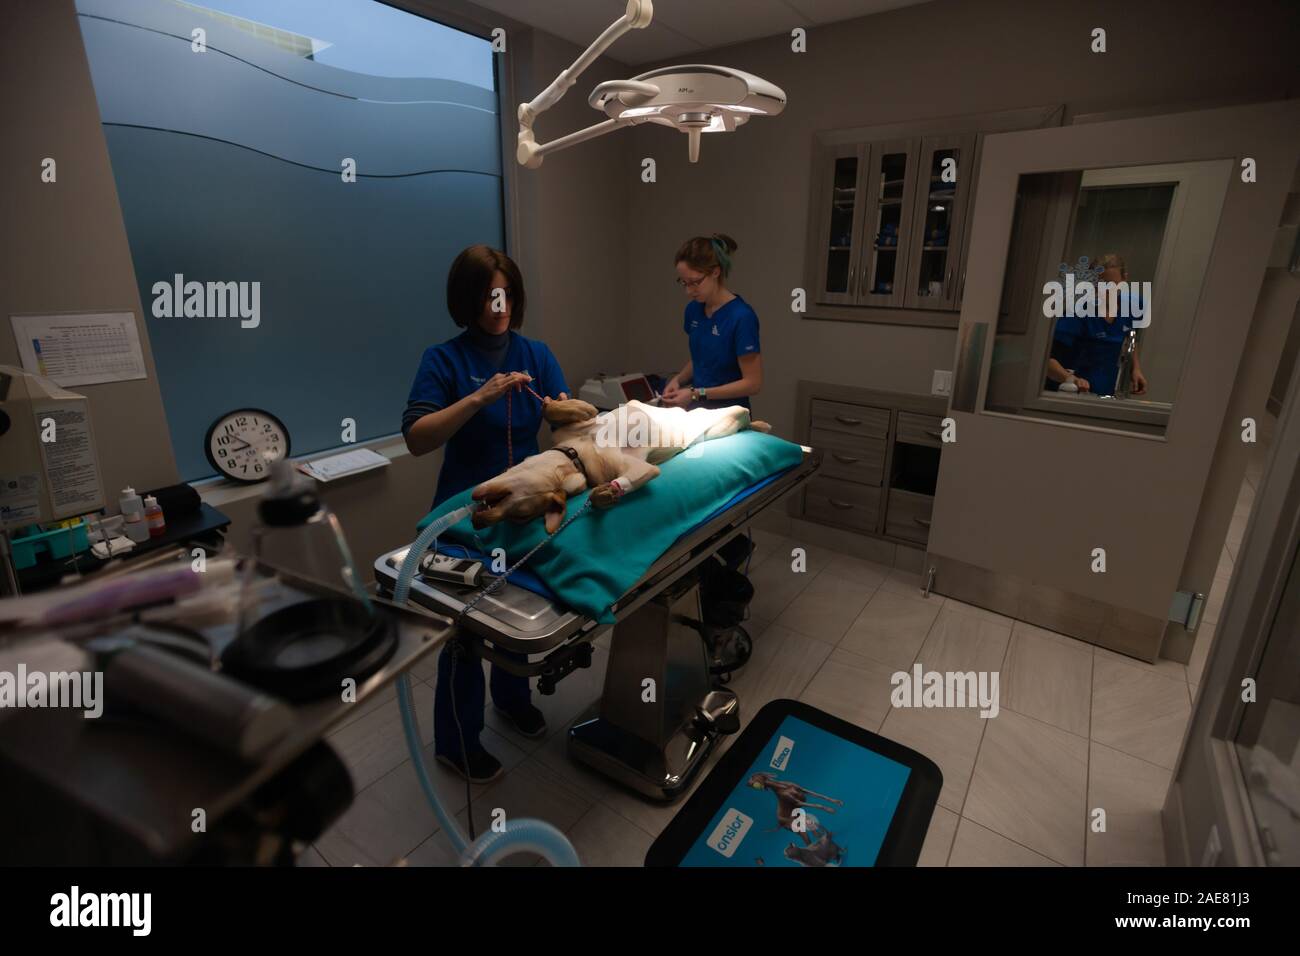 Veterinary technicians prepare a canine for surgery inside an operating room at a veterinary clinic. Stock Photo